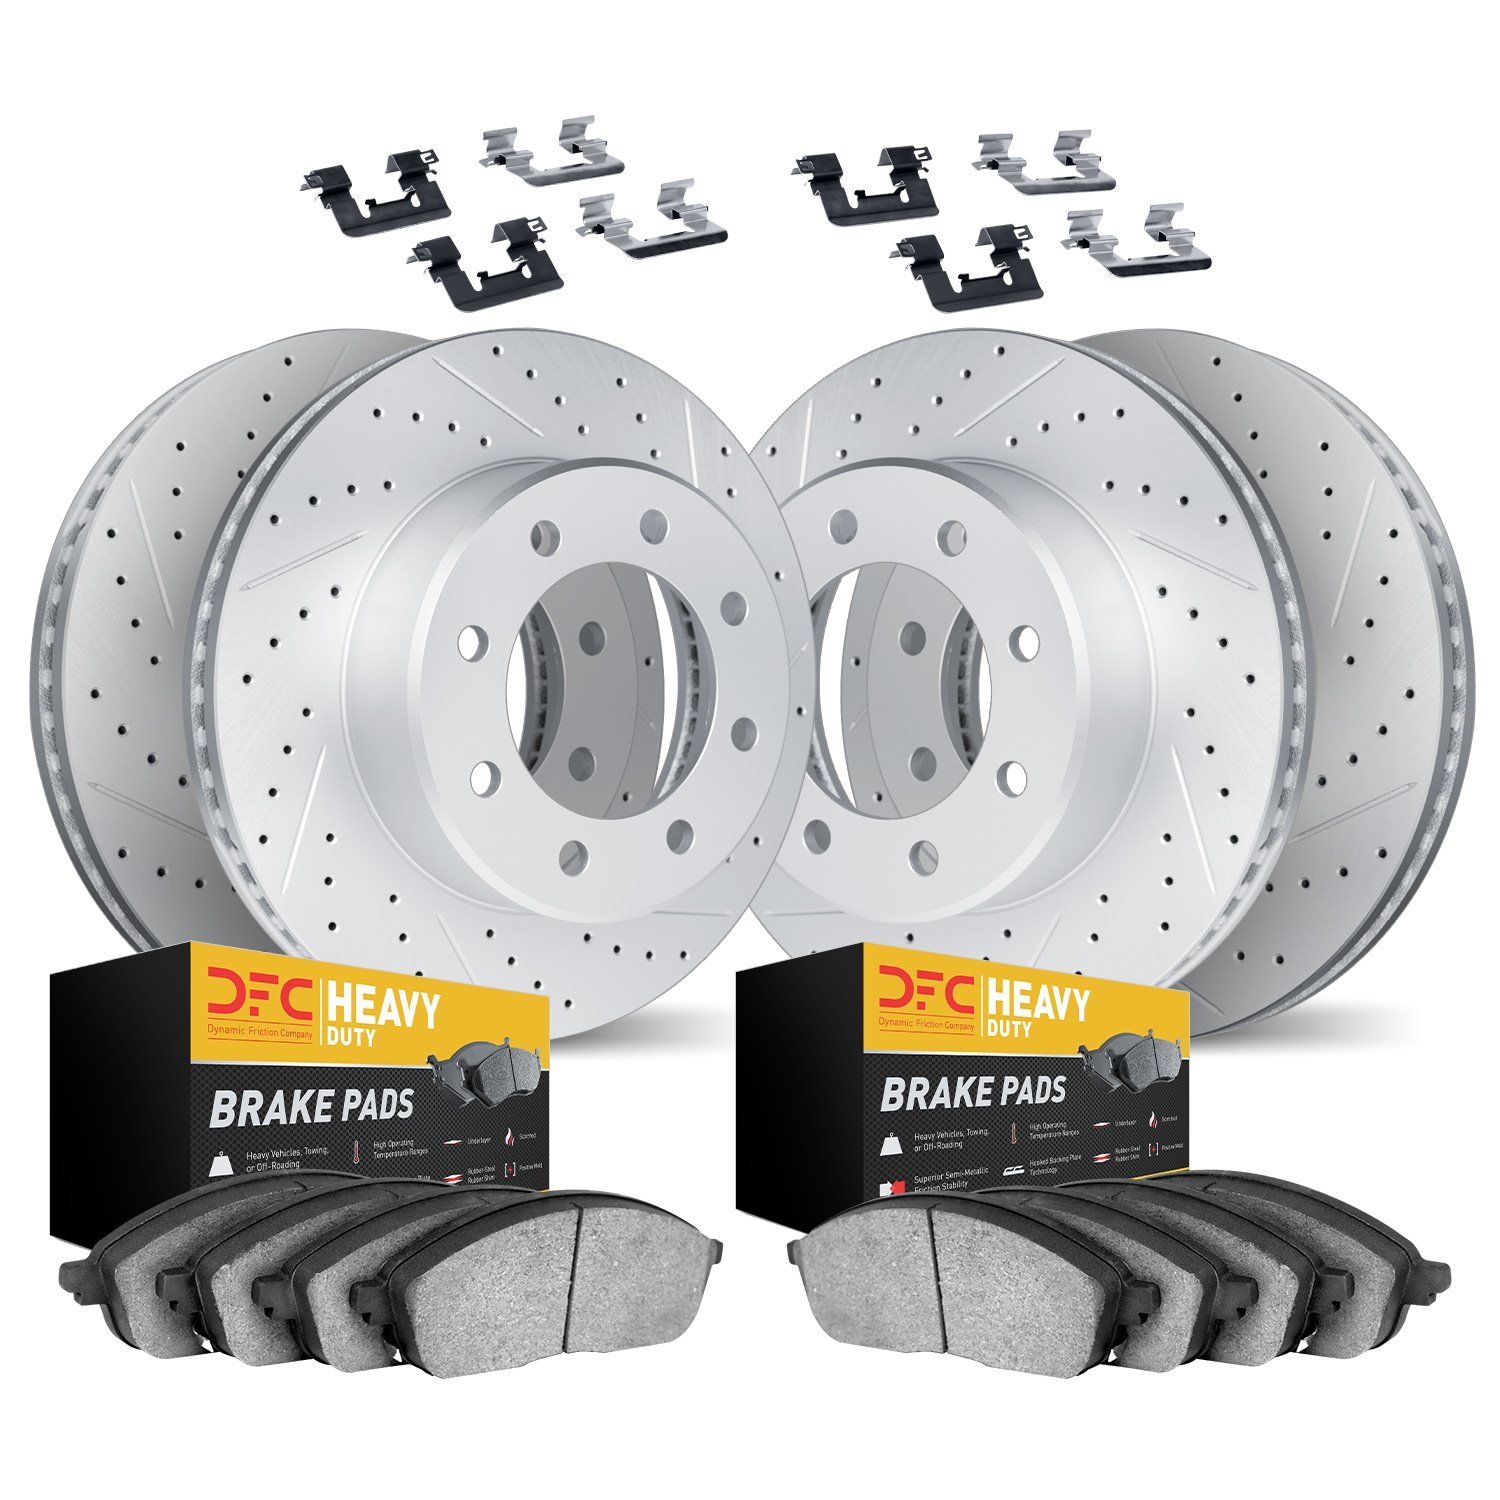 2214-99034 Geoperformance Drilled/Slotted Rotors w/Heavy-Duty Pads Kit & Hardware, 2000-2004 Ford/Lincoln/Mercury/Mazda, Positio